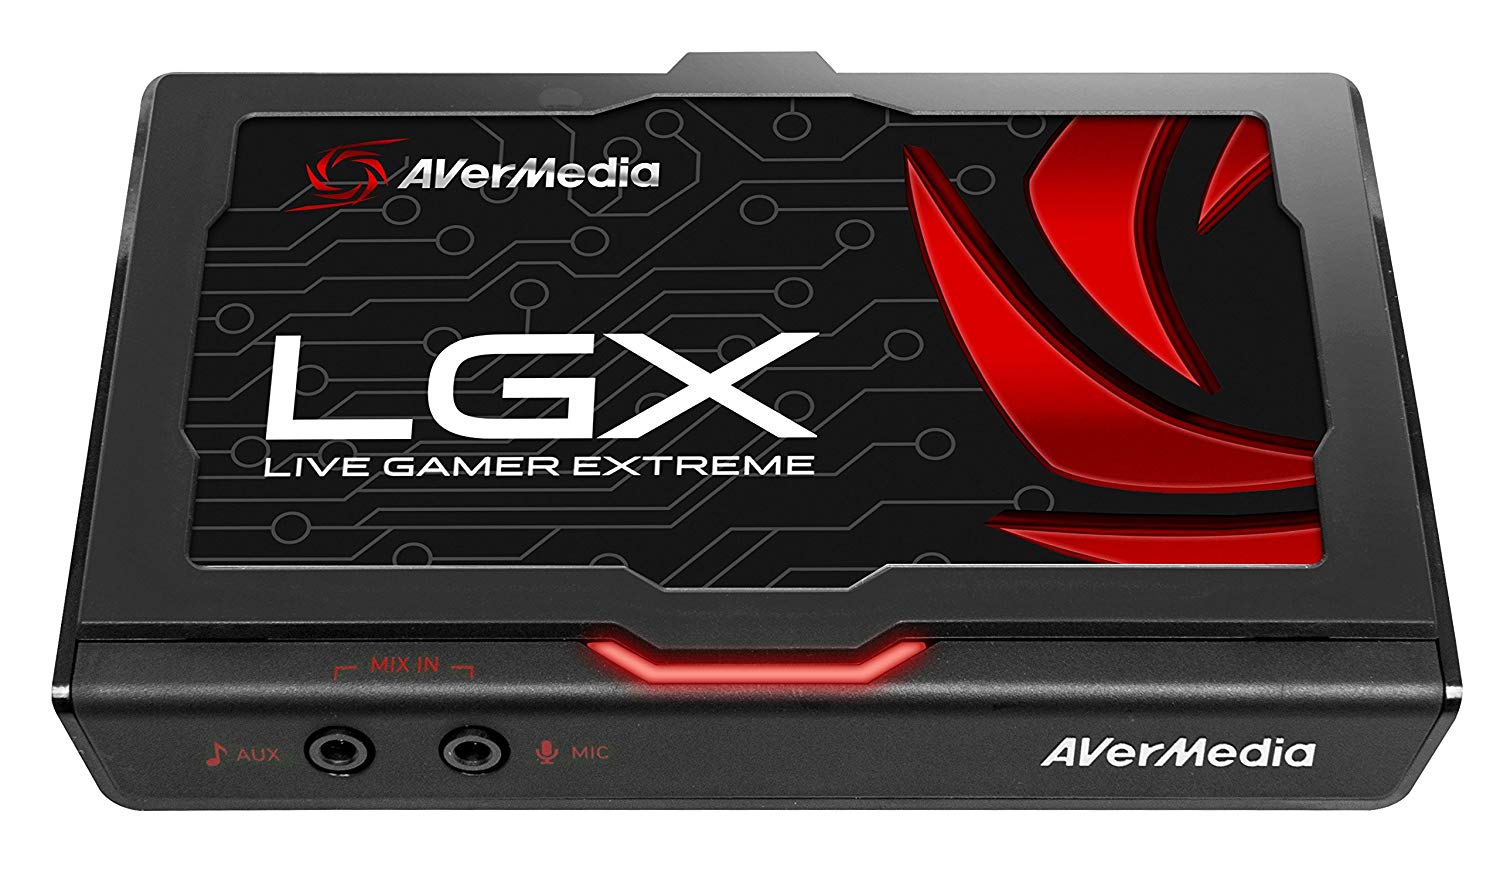 AVerMedia GC550 Live Gamer Extreme, USB3.0 Game Streaming and 